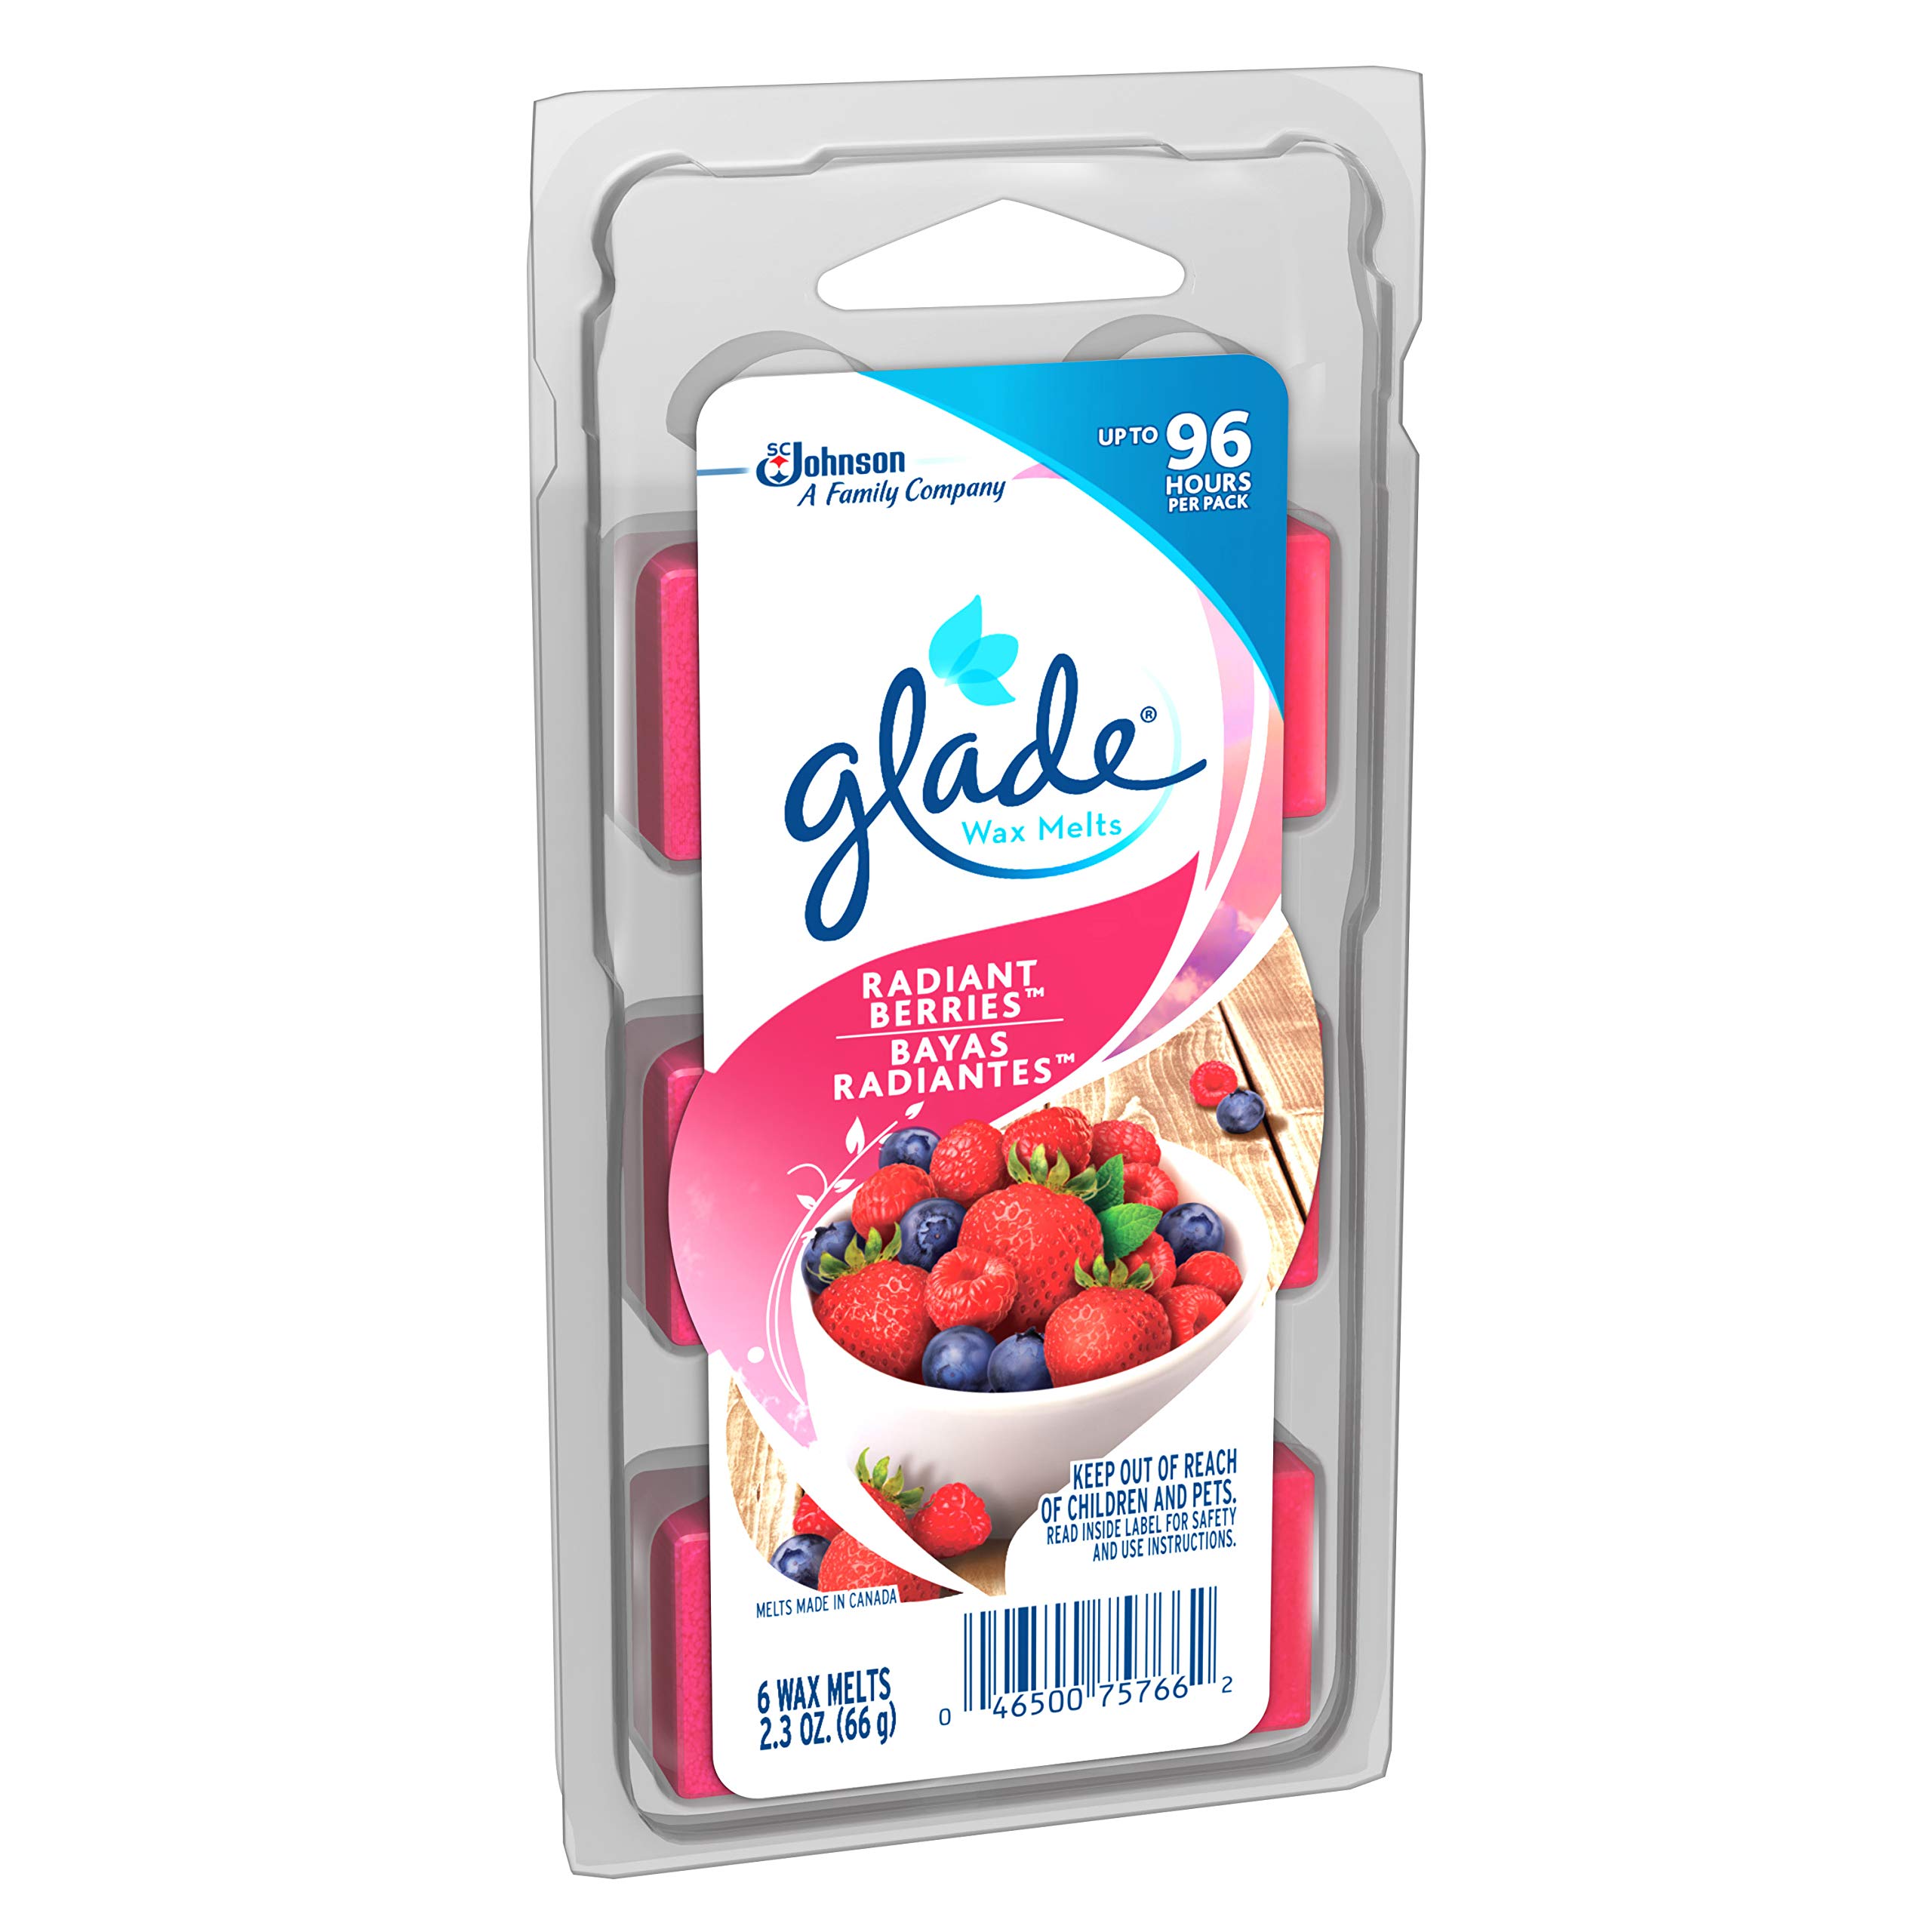 Glade Wax Melts Air Freshener, Scented Candles with Essential Oils for Home and Bathroom, Radiant Berries, 6 Count